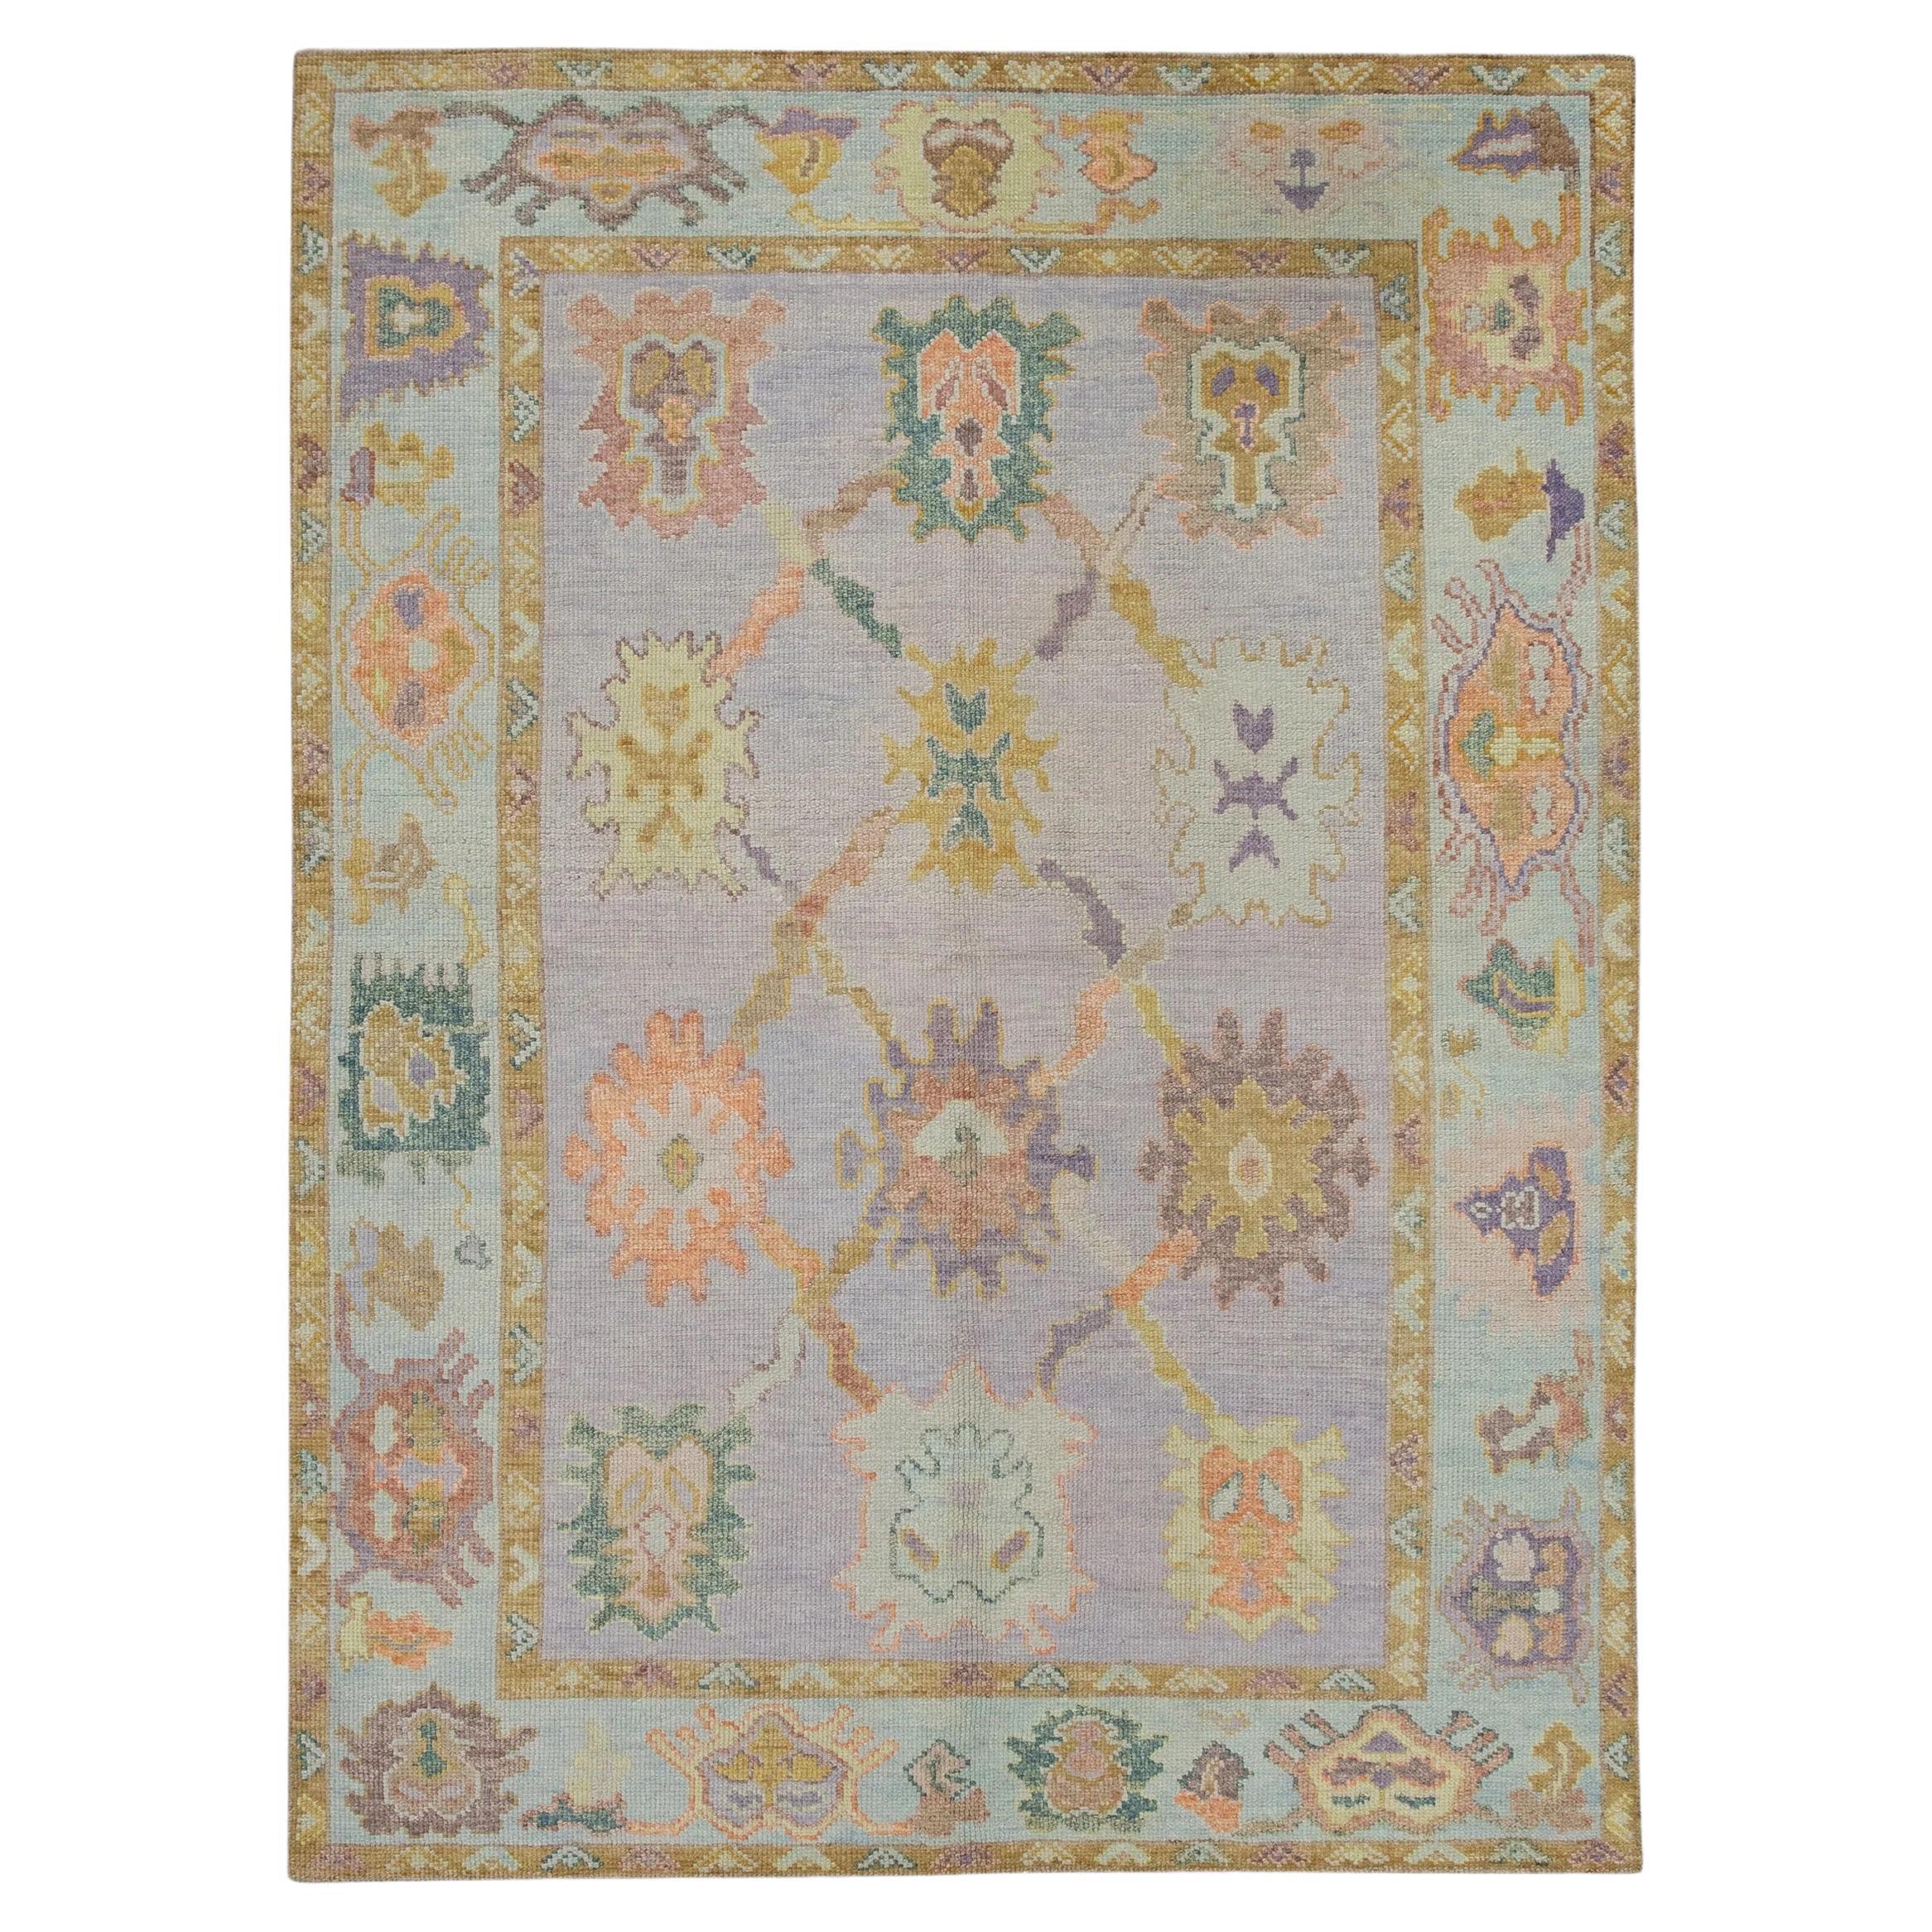 Purple Colorful Floral Handwoven Wool Turkish Oushak Rug 4'10" x 6'3" For Sale